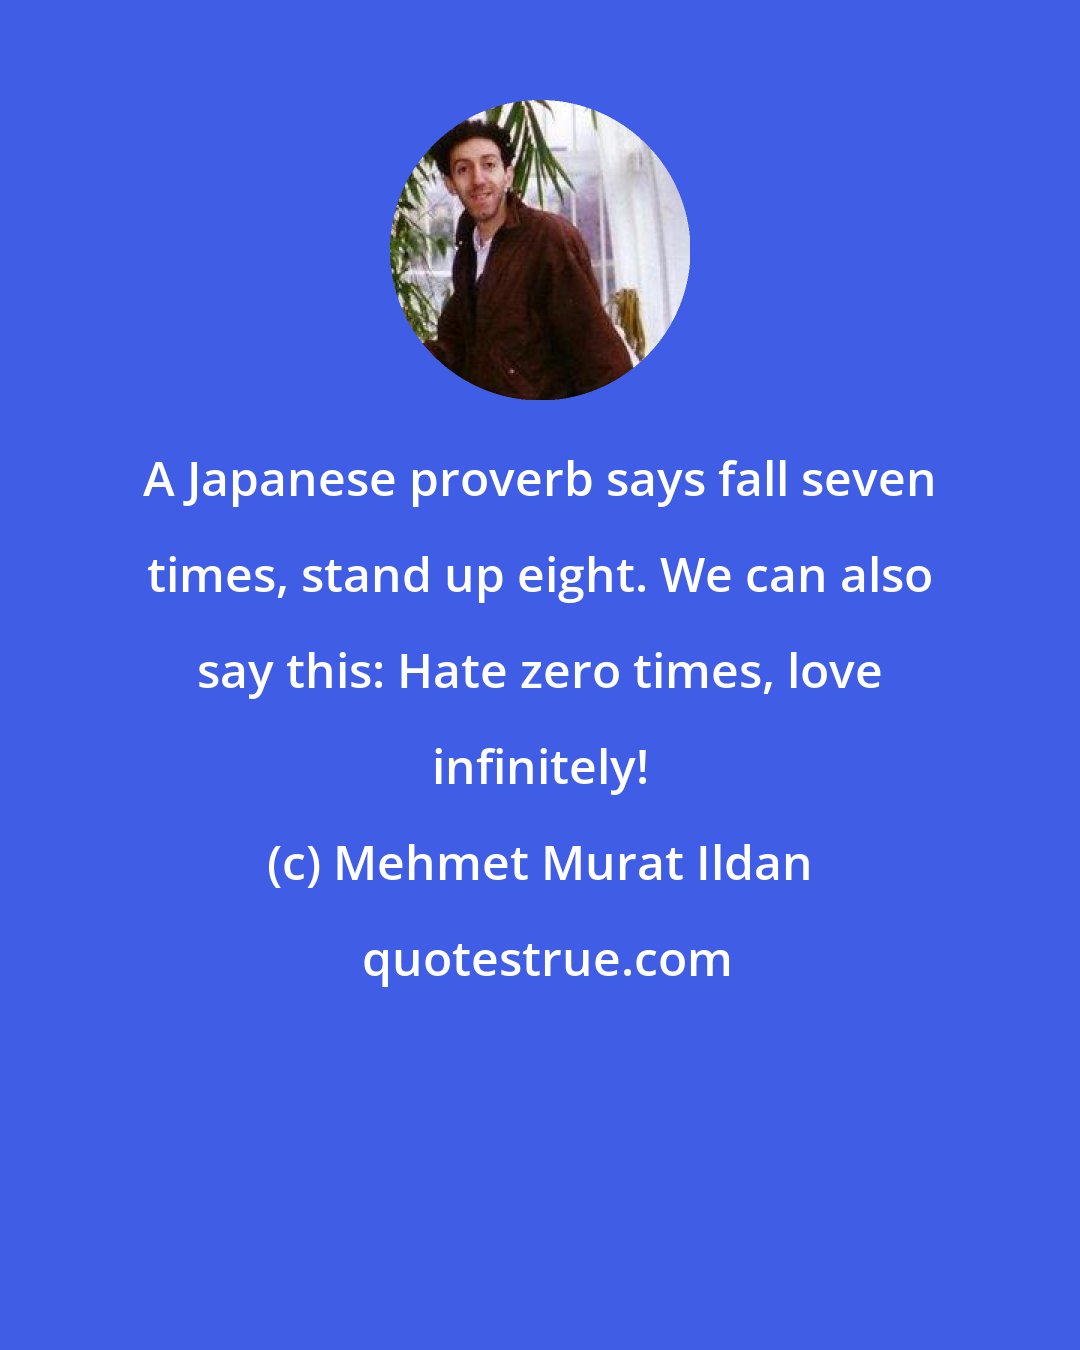 Mehmet Murat Ildan: A Japanese proverb says fall seven times, stand up eight. We can also say this: Hate zero times, love infinitely!